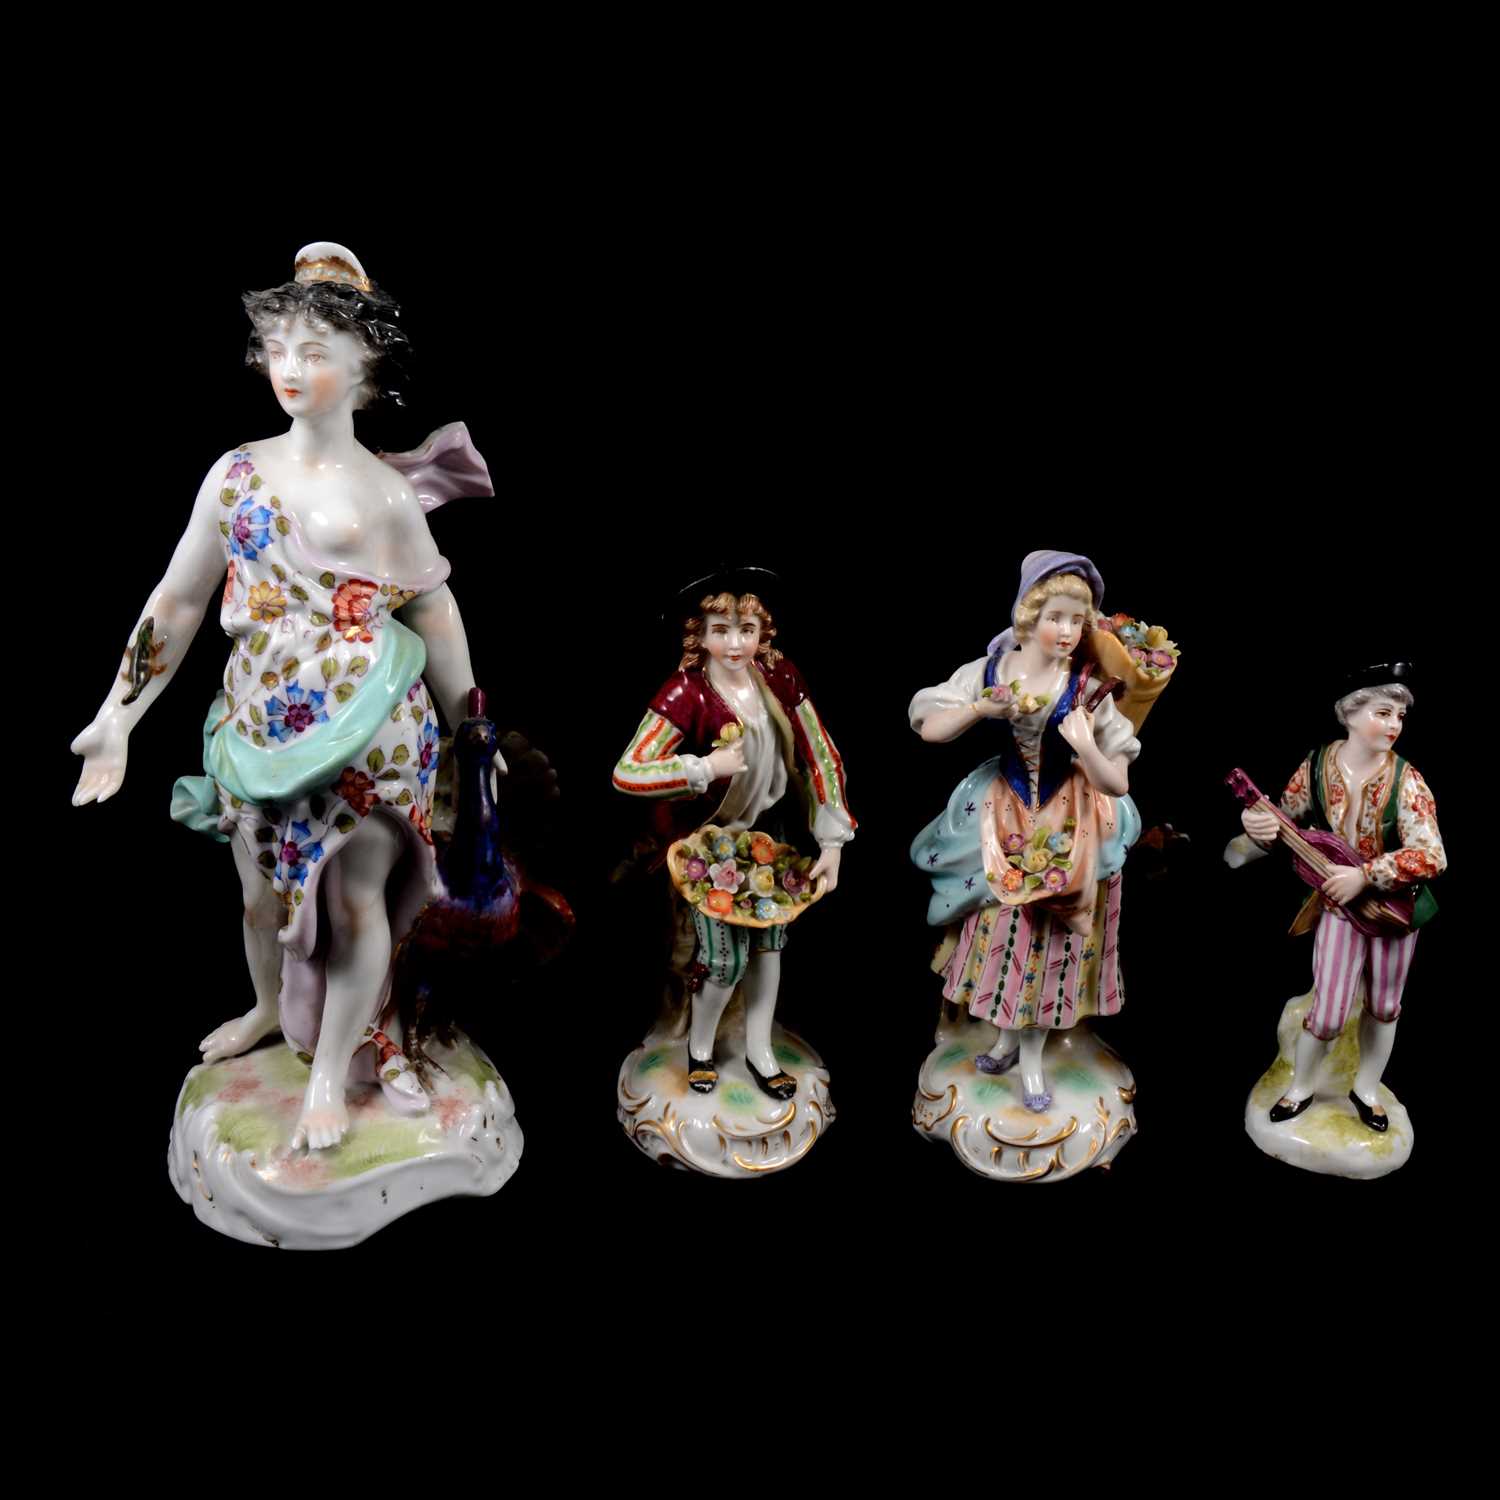 Lot 15 - Sitzendorf porcelain figure, Juno with a peacock, a pair of figures and one other